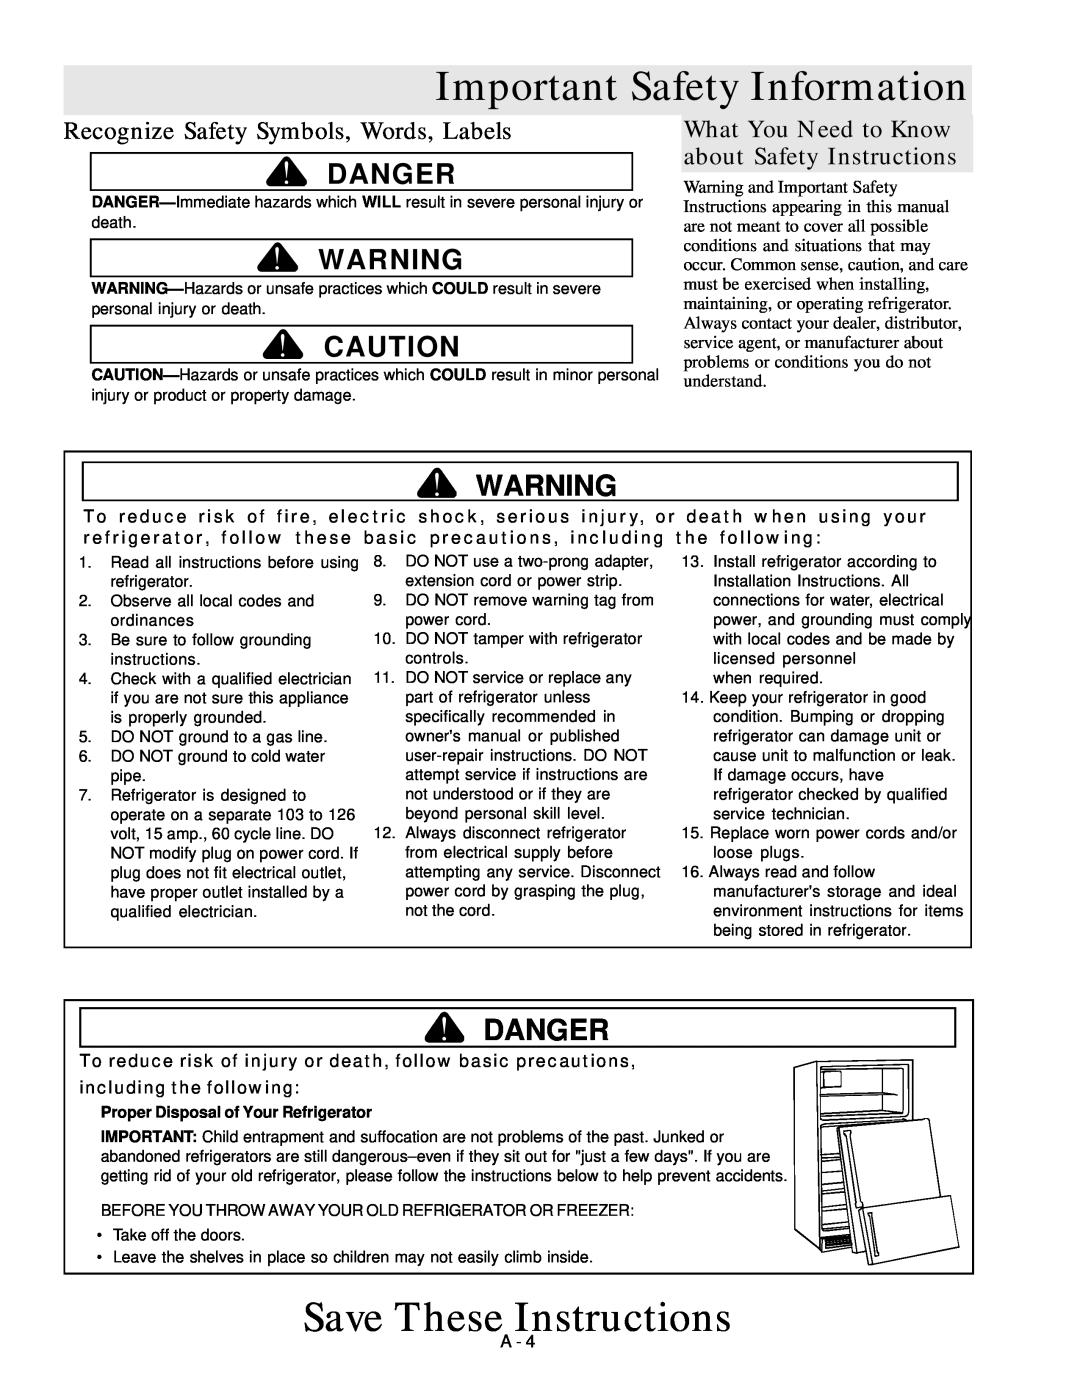 Amana Bottom-Freezer Refrigerator Important Safety Information, Save These Instructions, Danger, including the following 